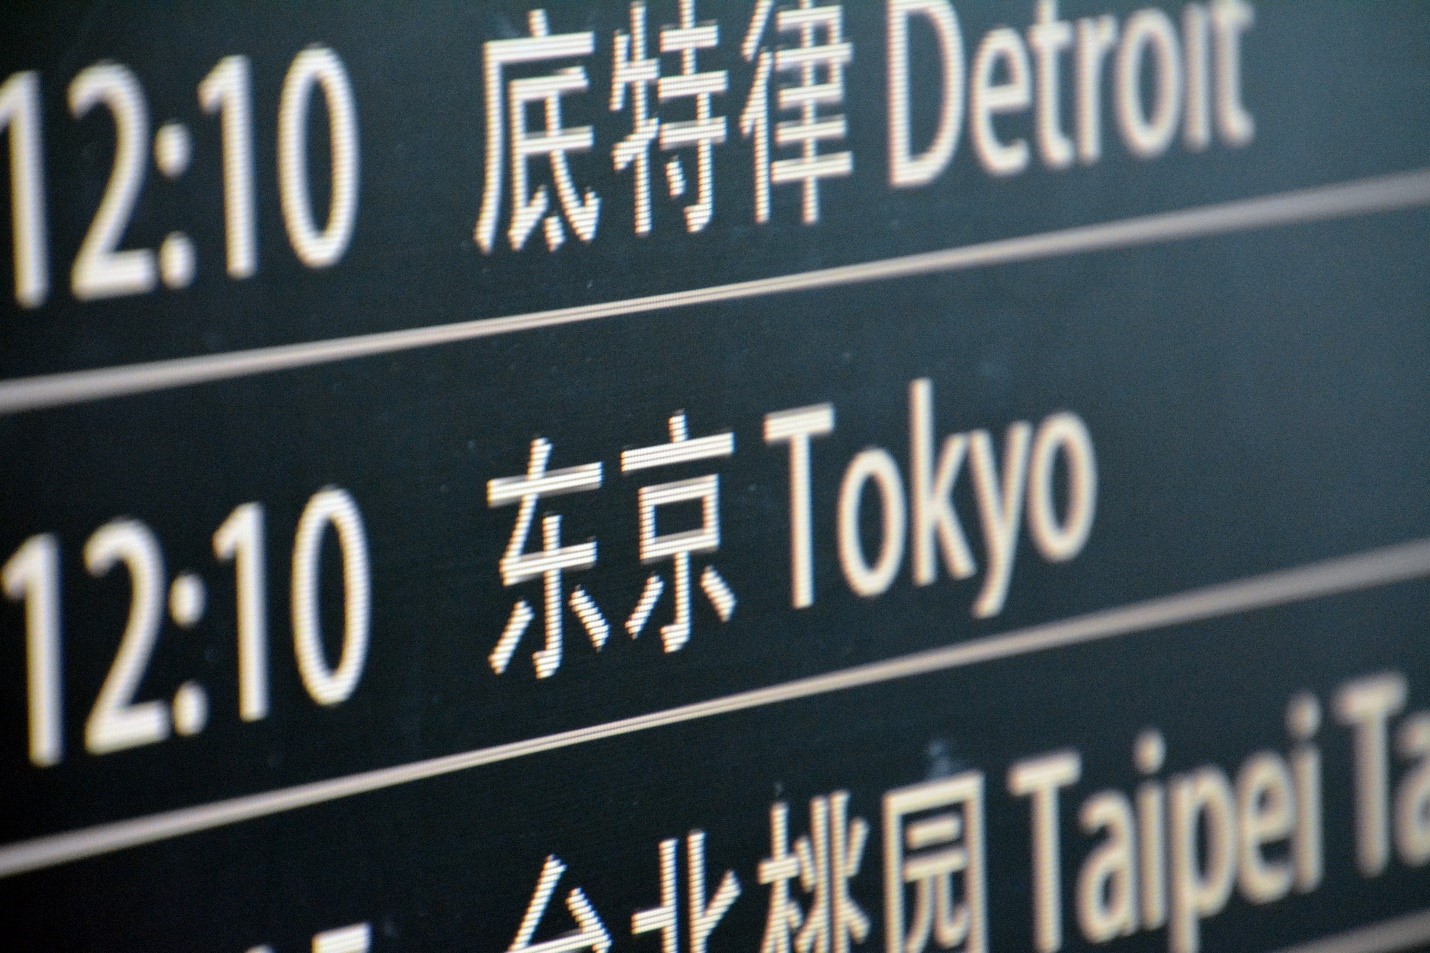 Time board with Japanese and English writing